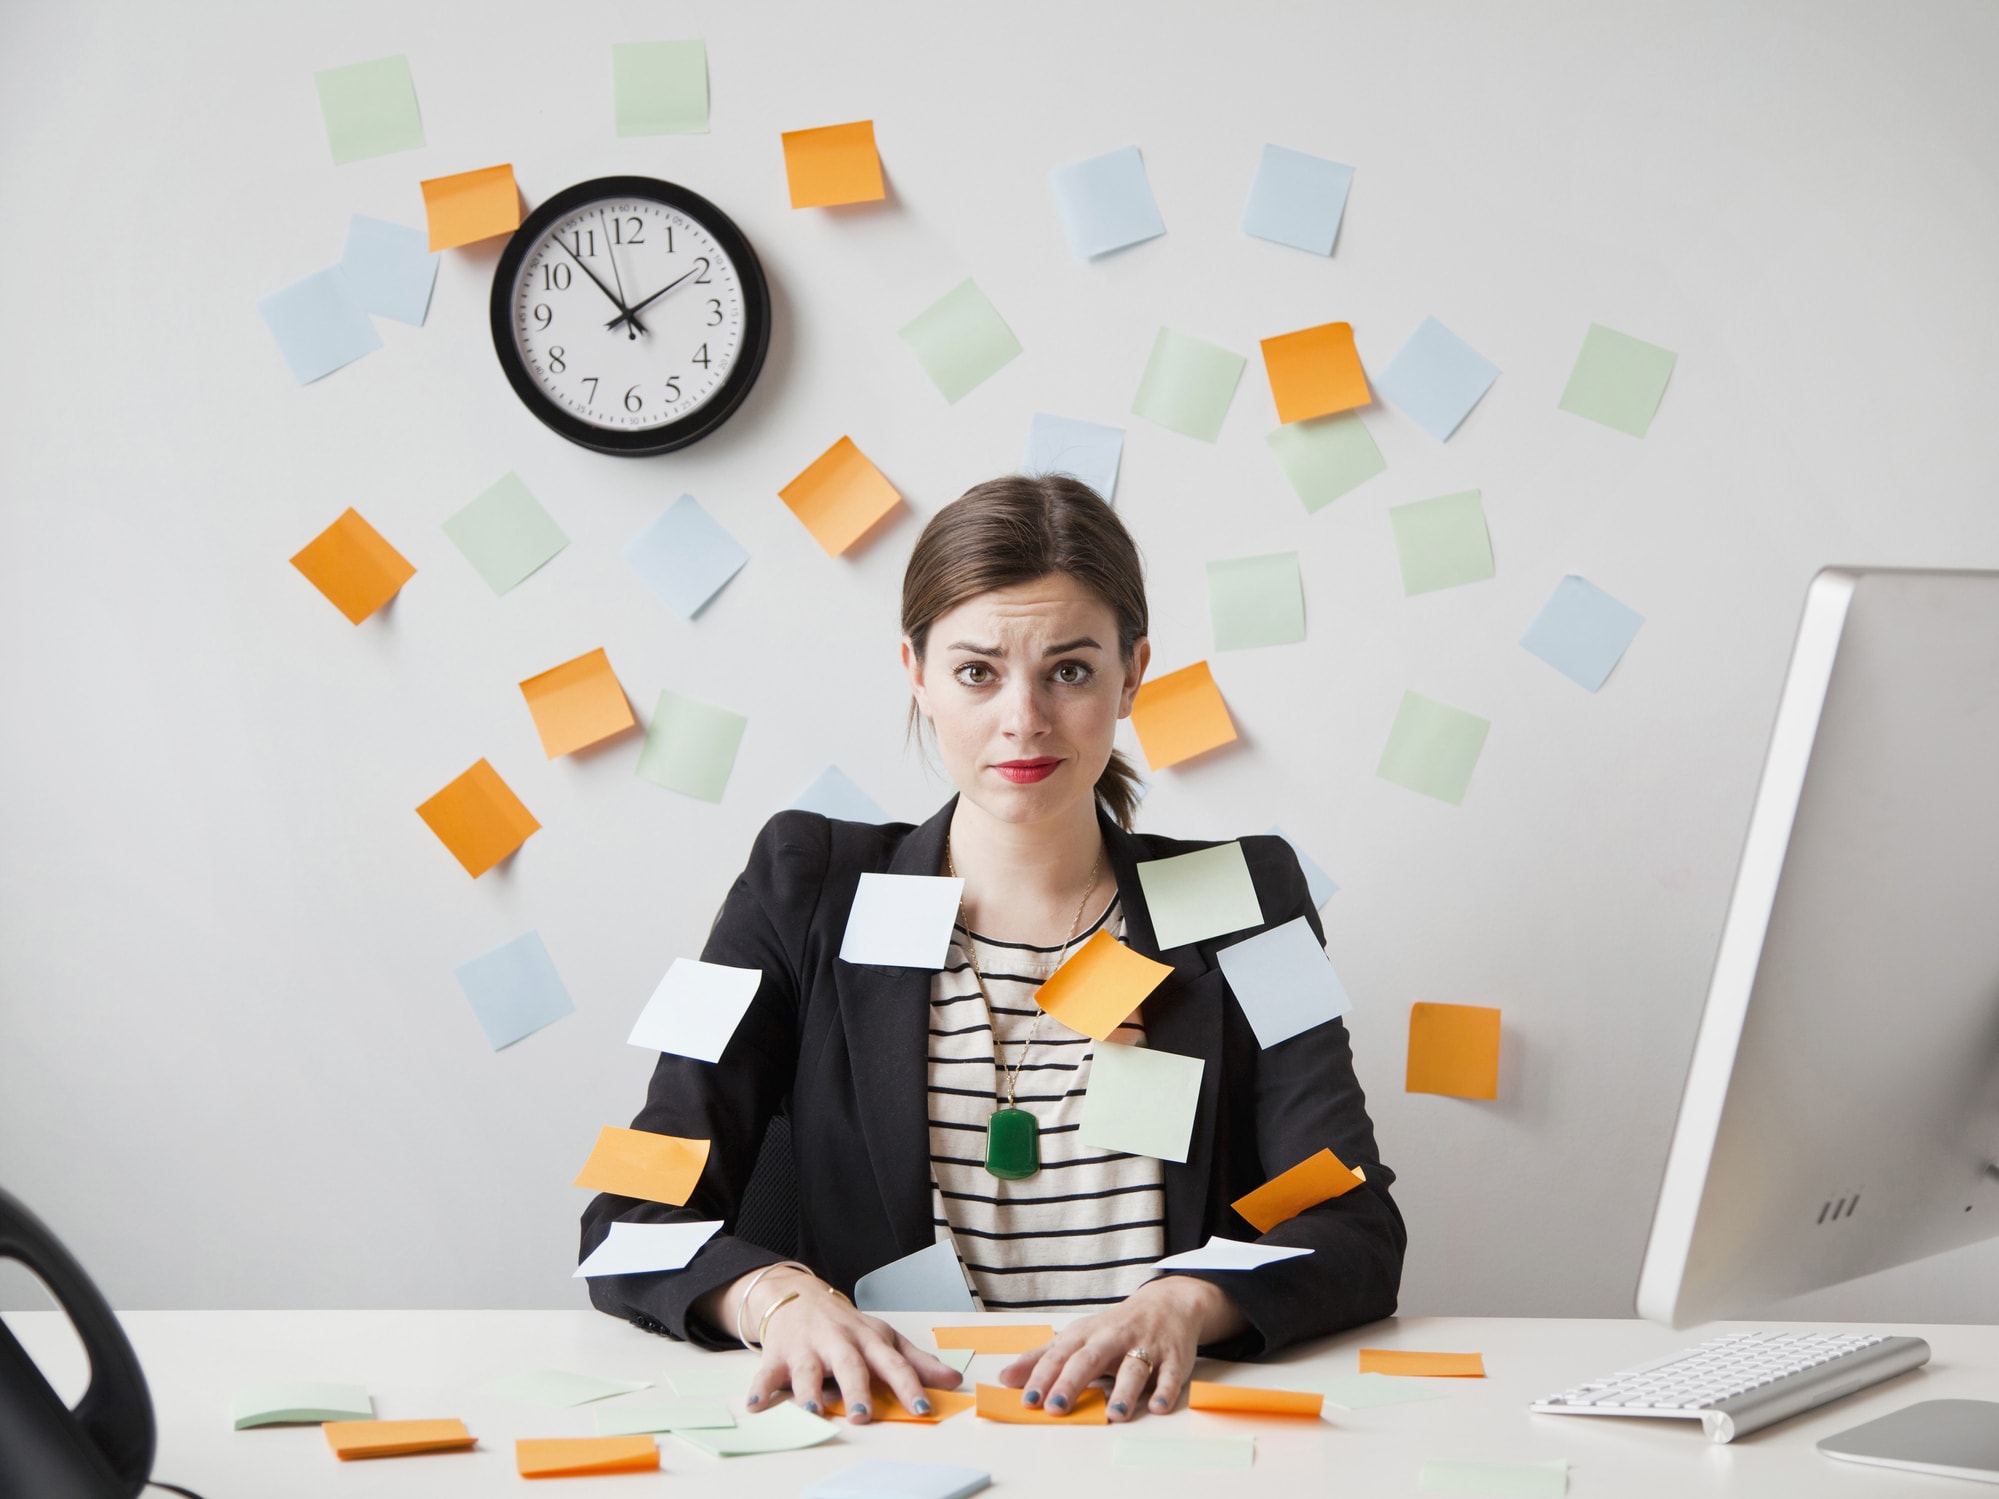 Woman Covered in Post-It Notes Looking Stressed